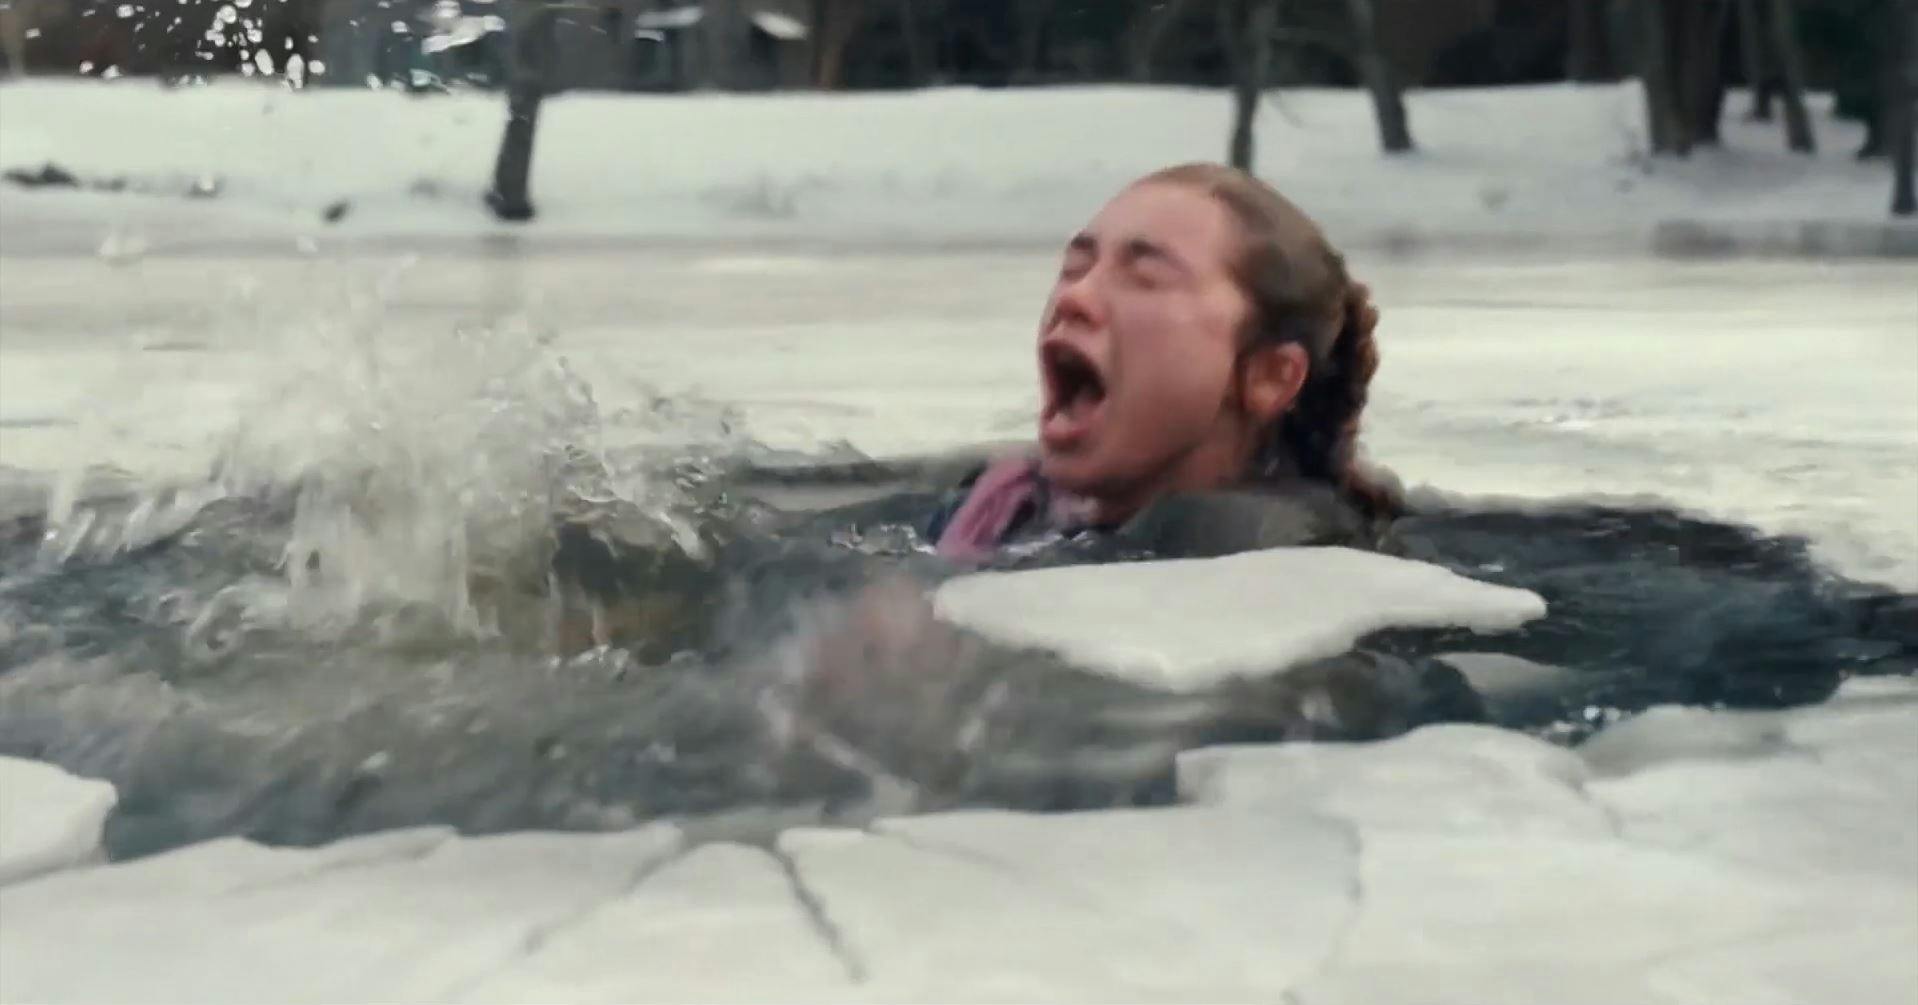 A woman drowning in icy water